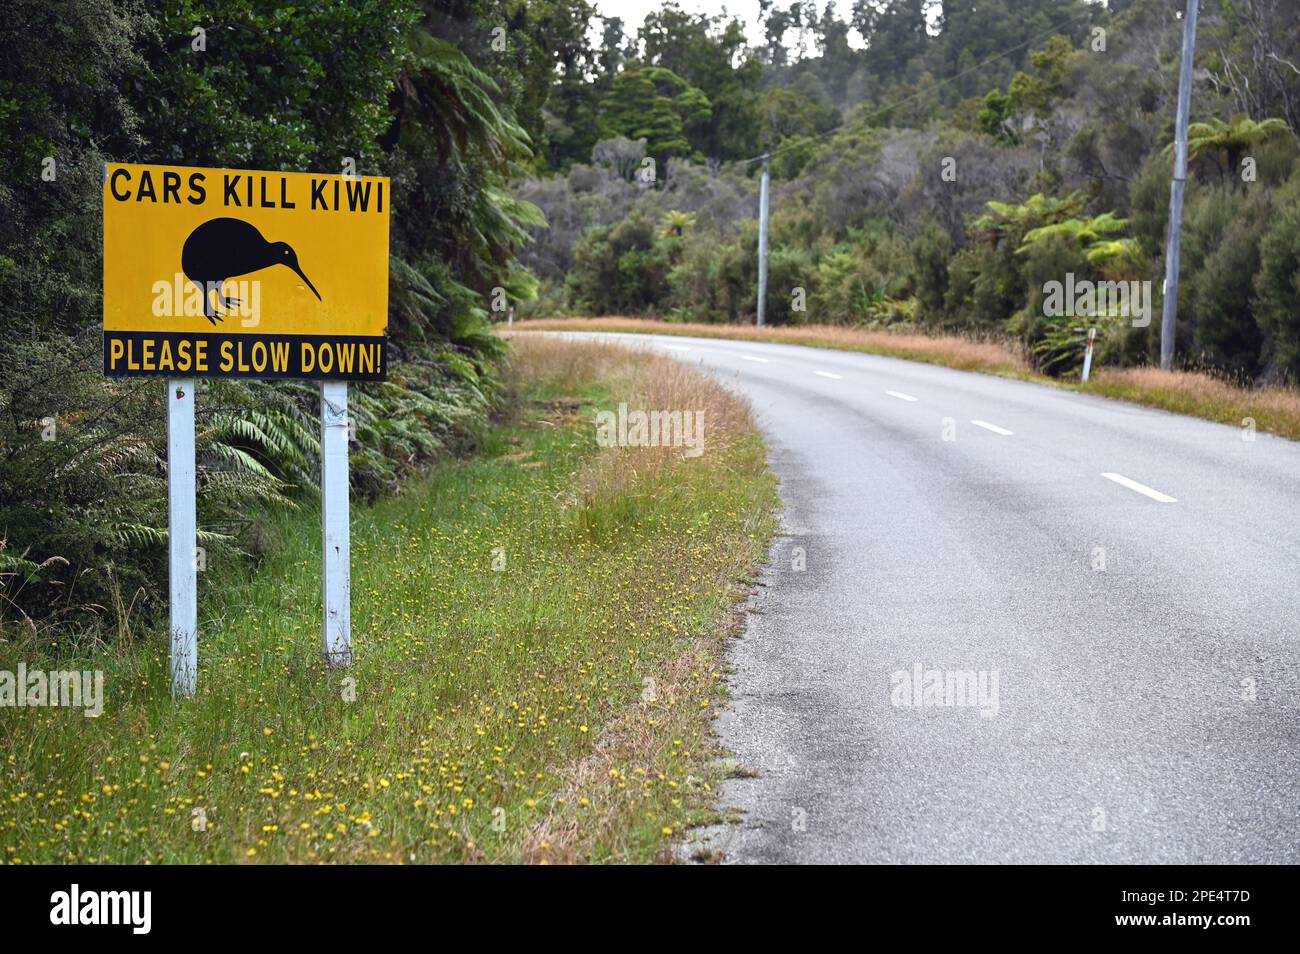 Road side signs designed to make drivers aware that Kiwis may be encountered in the area. The signs are near the West Coast settlement of Okarito Stock Photo